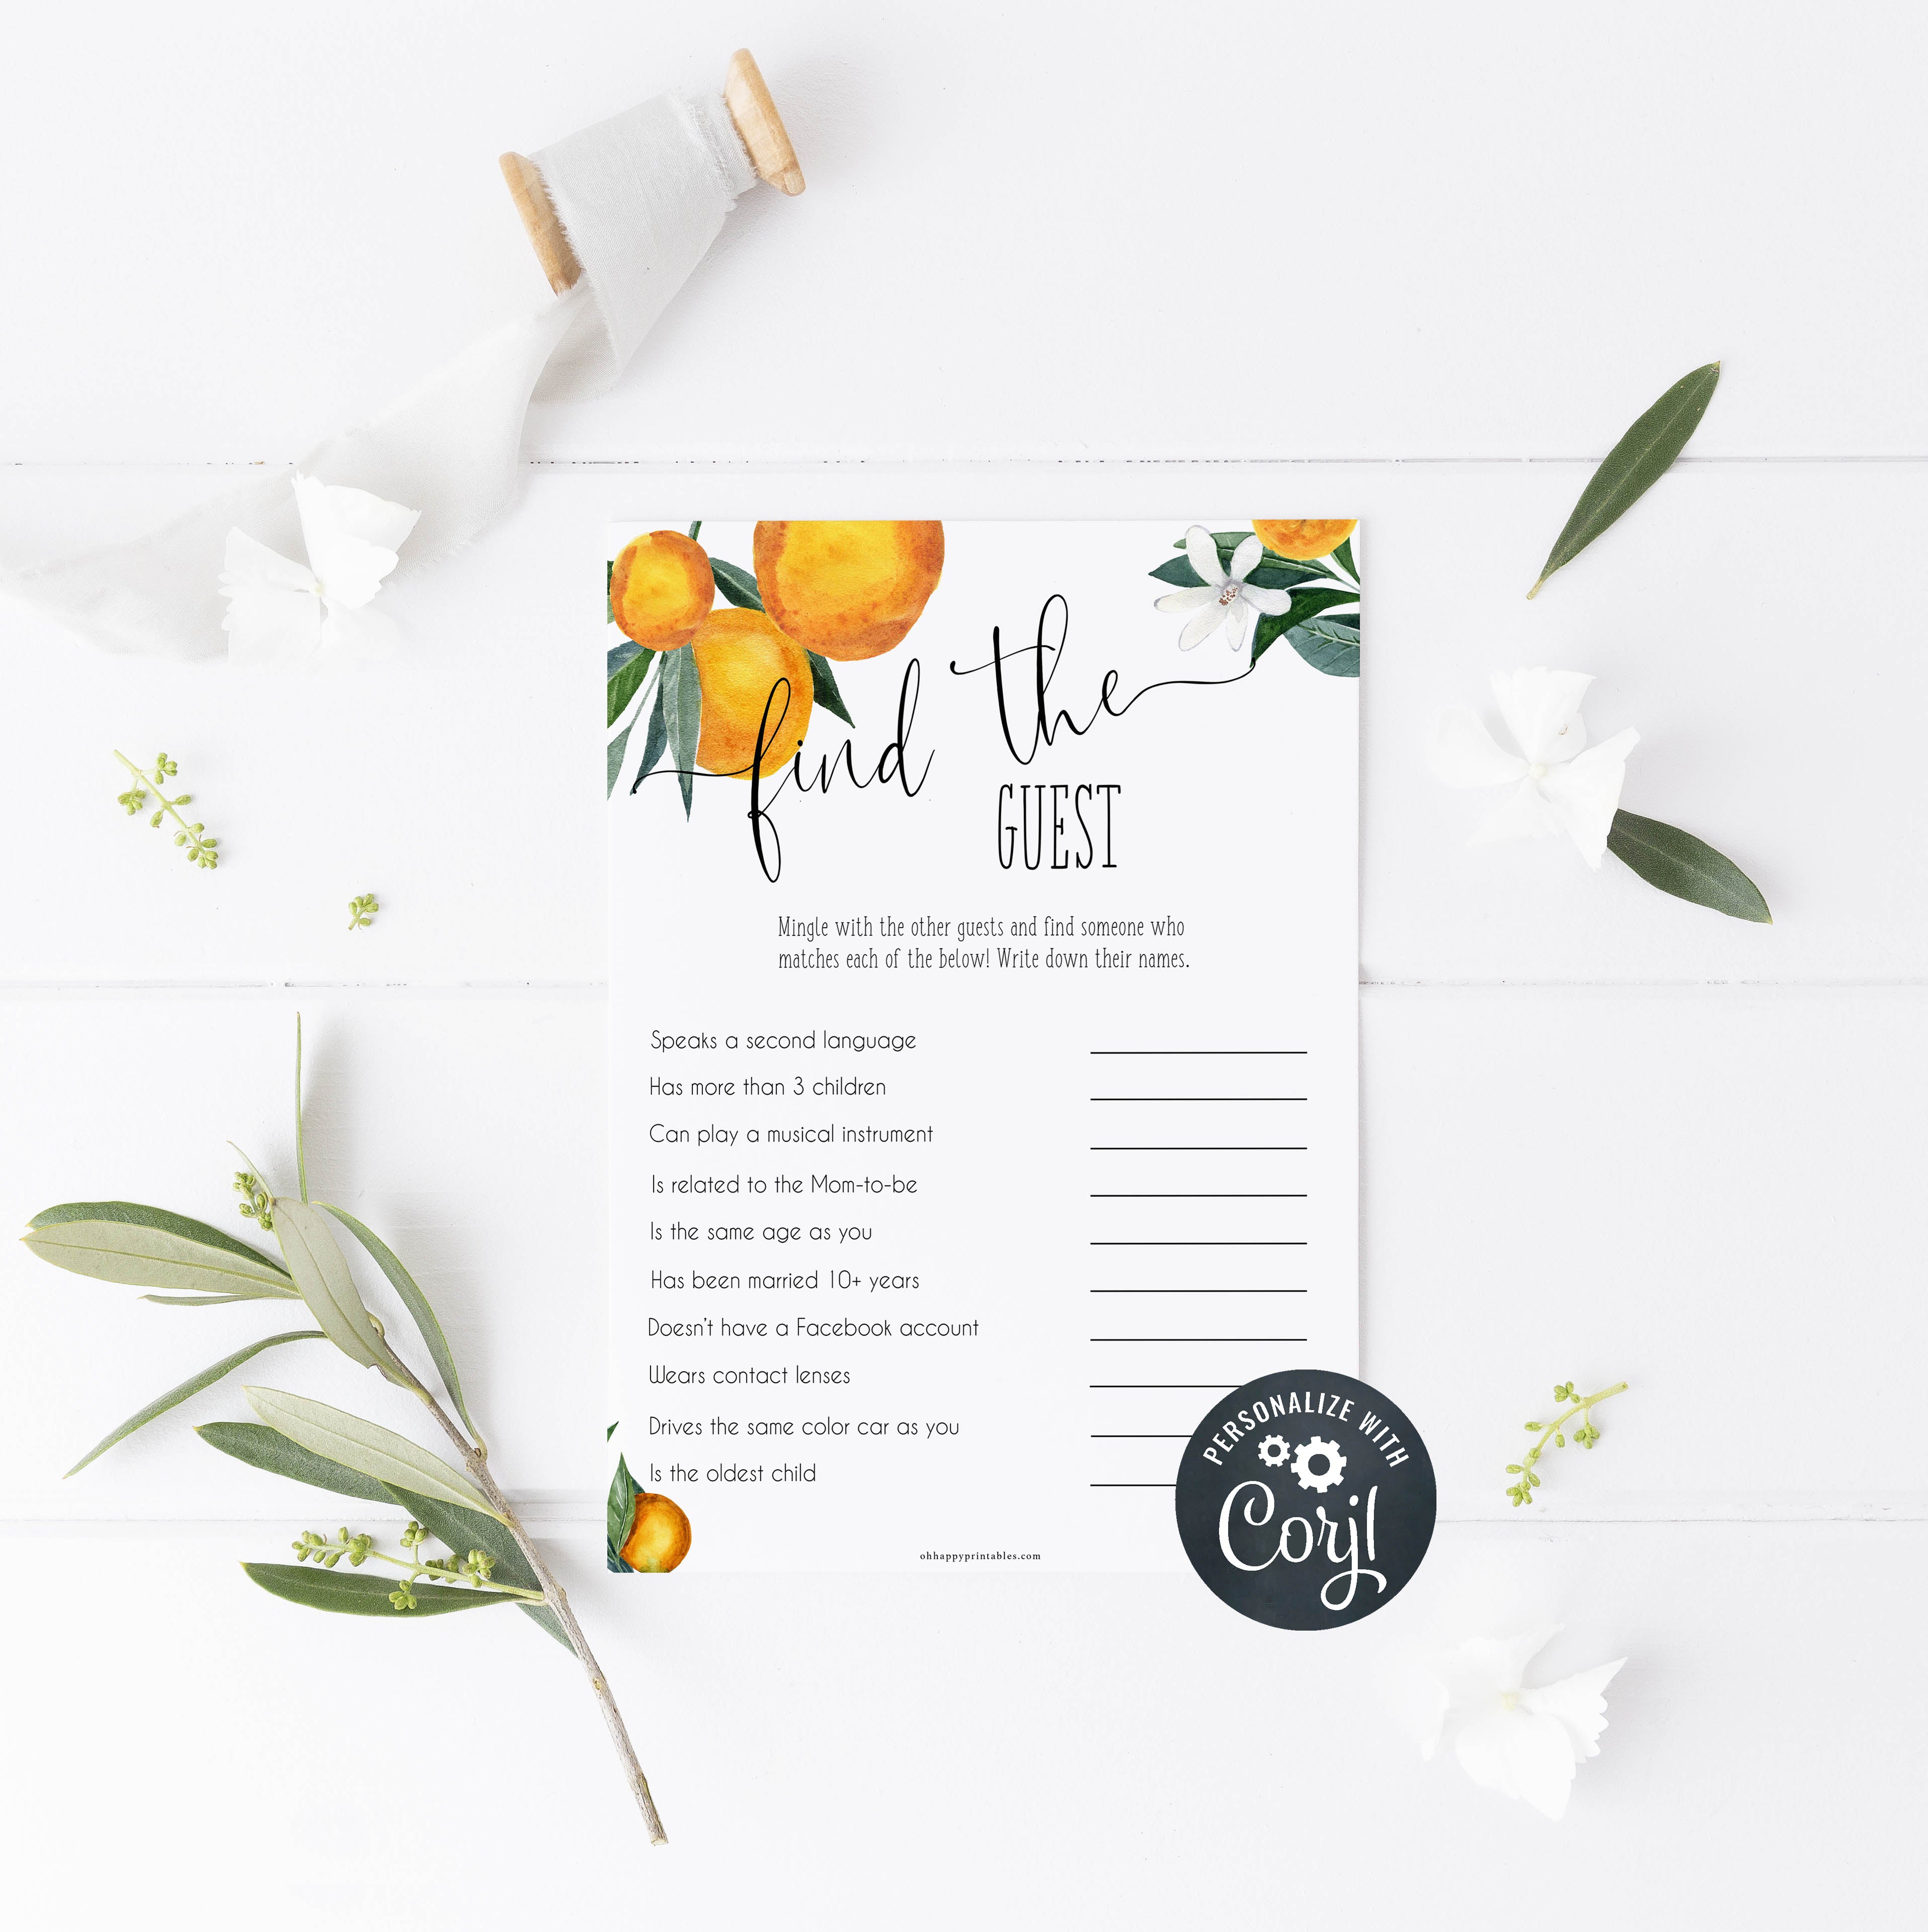 find the guest baby shower game, Printable baby shower games, little cutie baby games, baby shower games, fun baby shower ideas, top baby shower ideas, little cutie baby shower, baby shower games, fun little cutie baby shower ideas, citrus baby shower games, citrus baby shower, orange baby shower